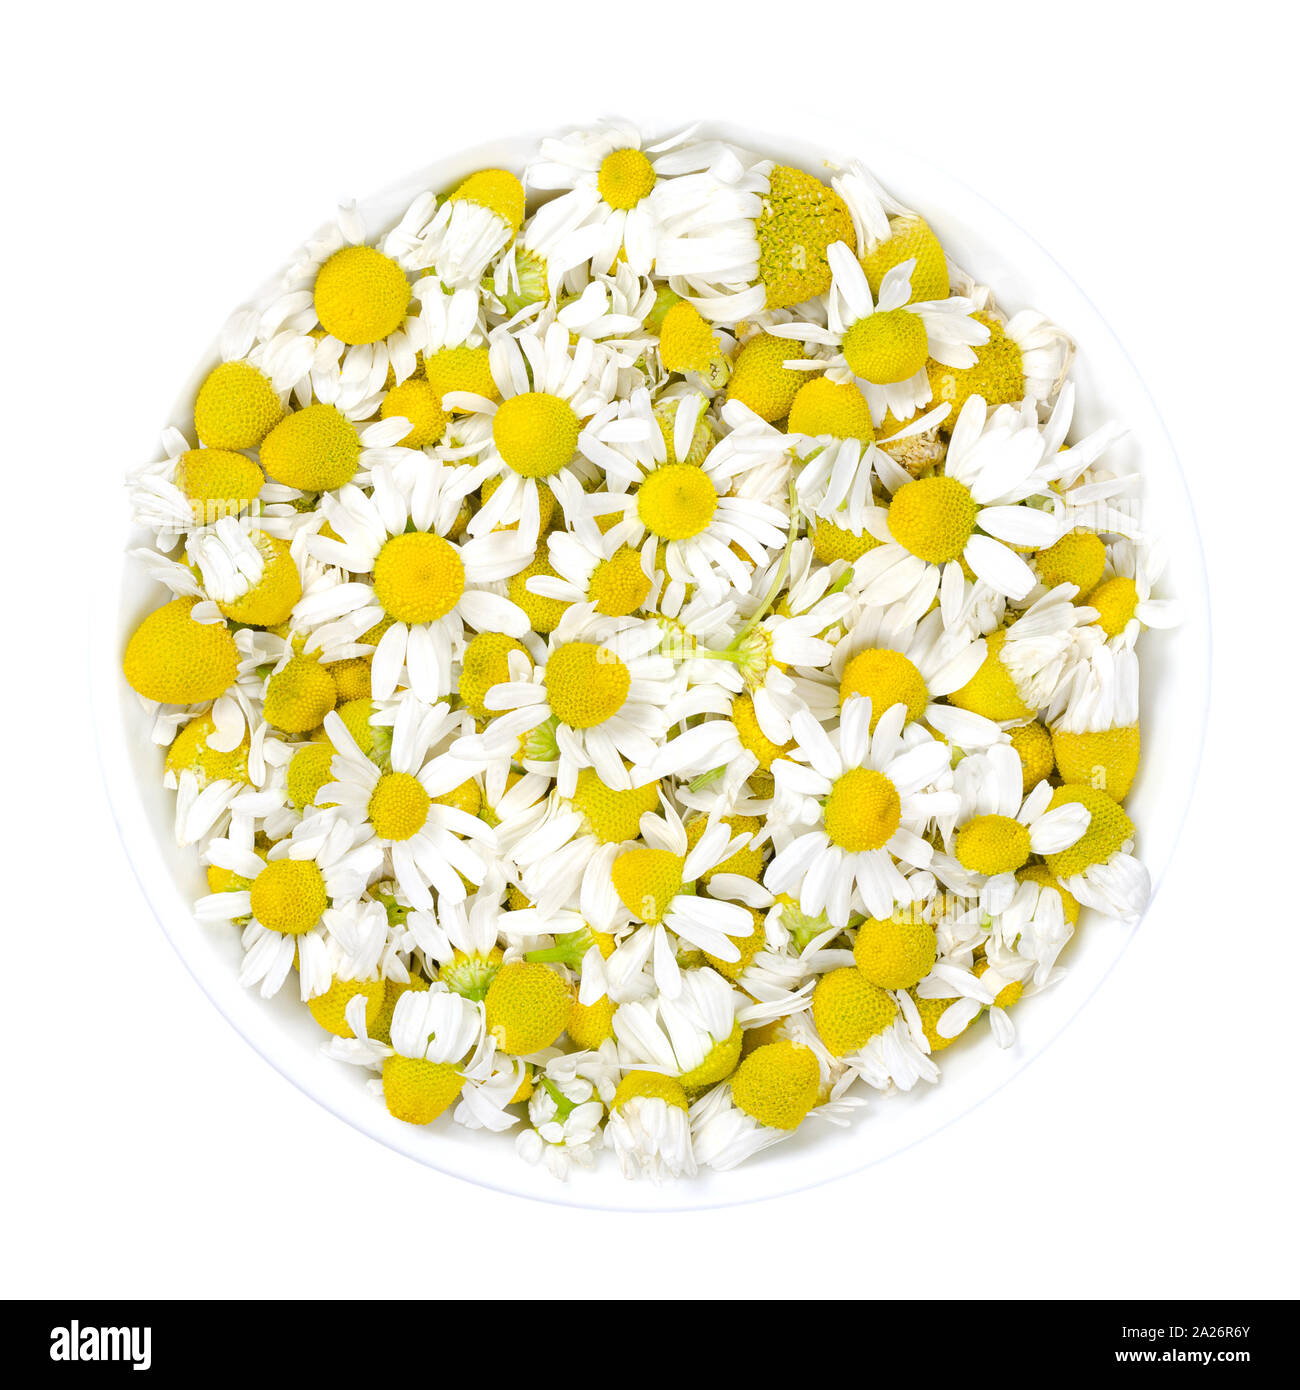 Chamomile blossoms in white bowl. Fresh camomile flowers, Matricaria chamomilla, used for herbal infusions and in traditional medicine. Stock Photo